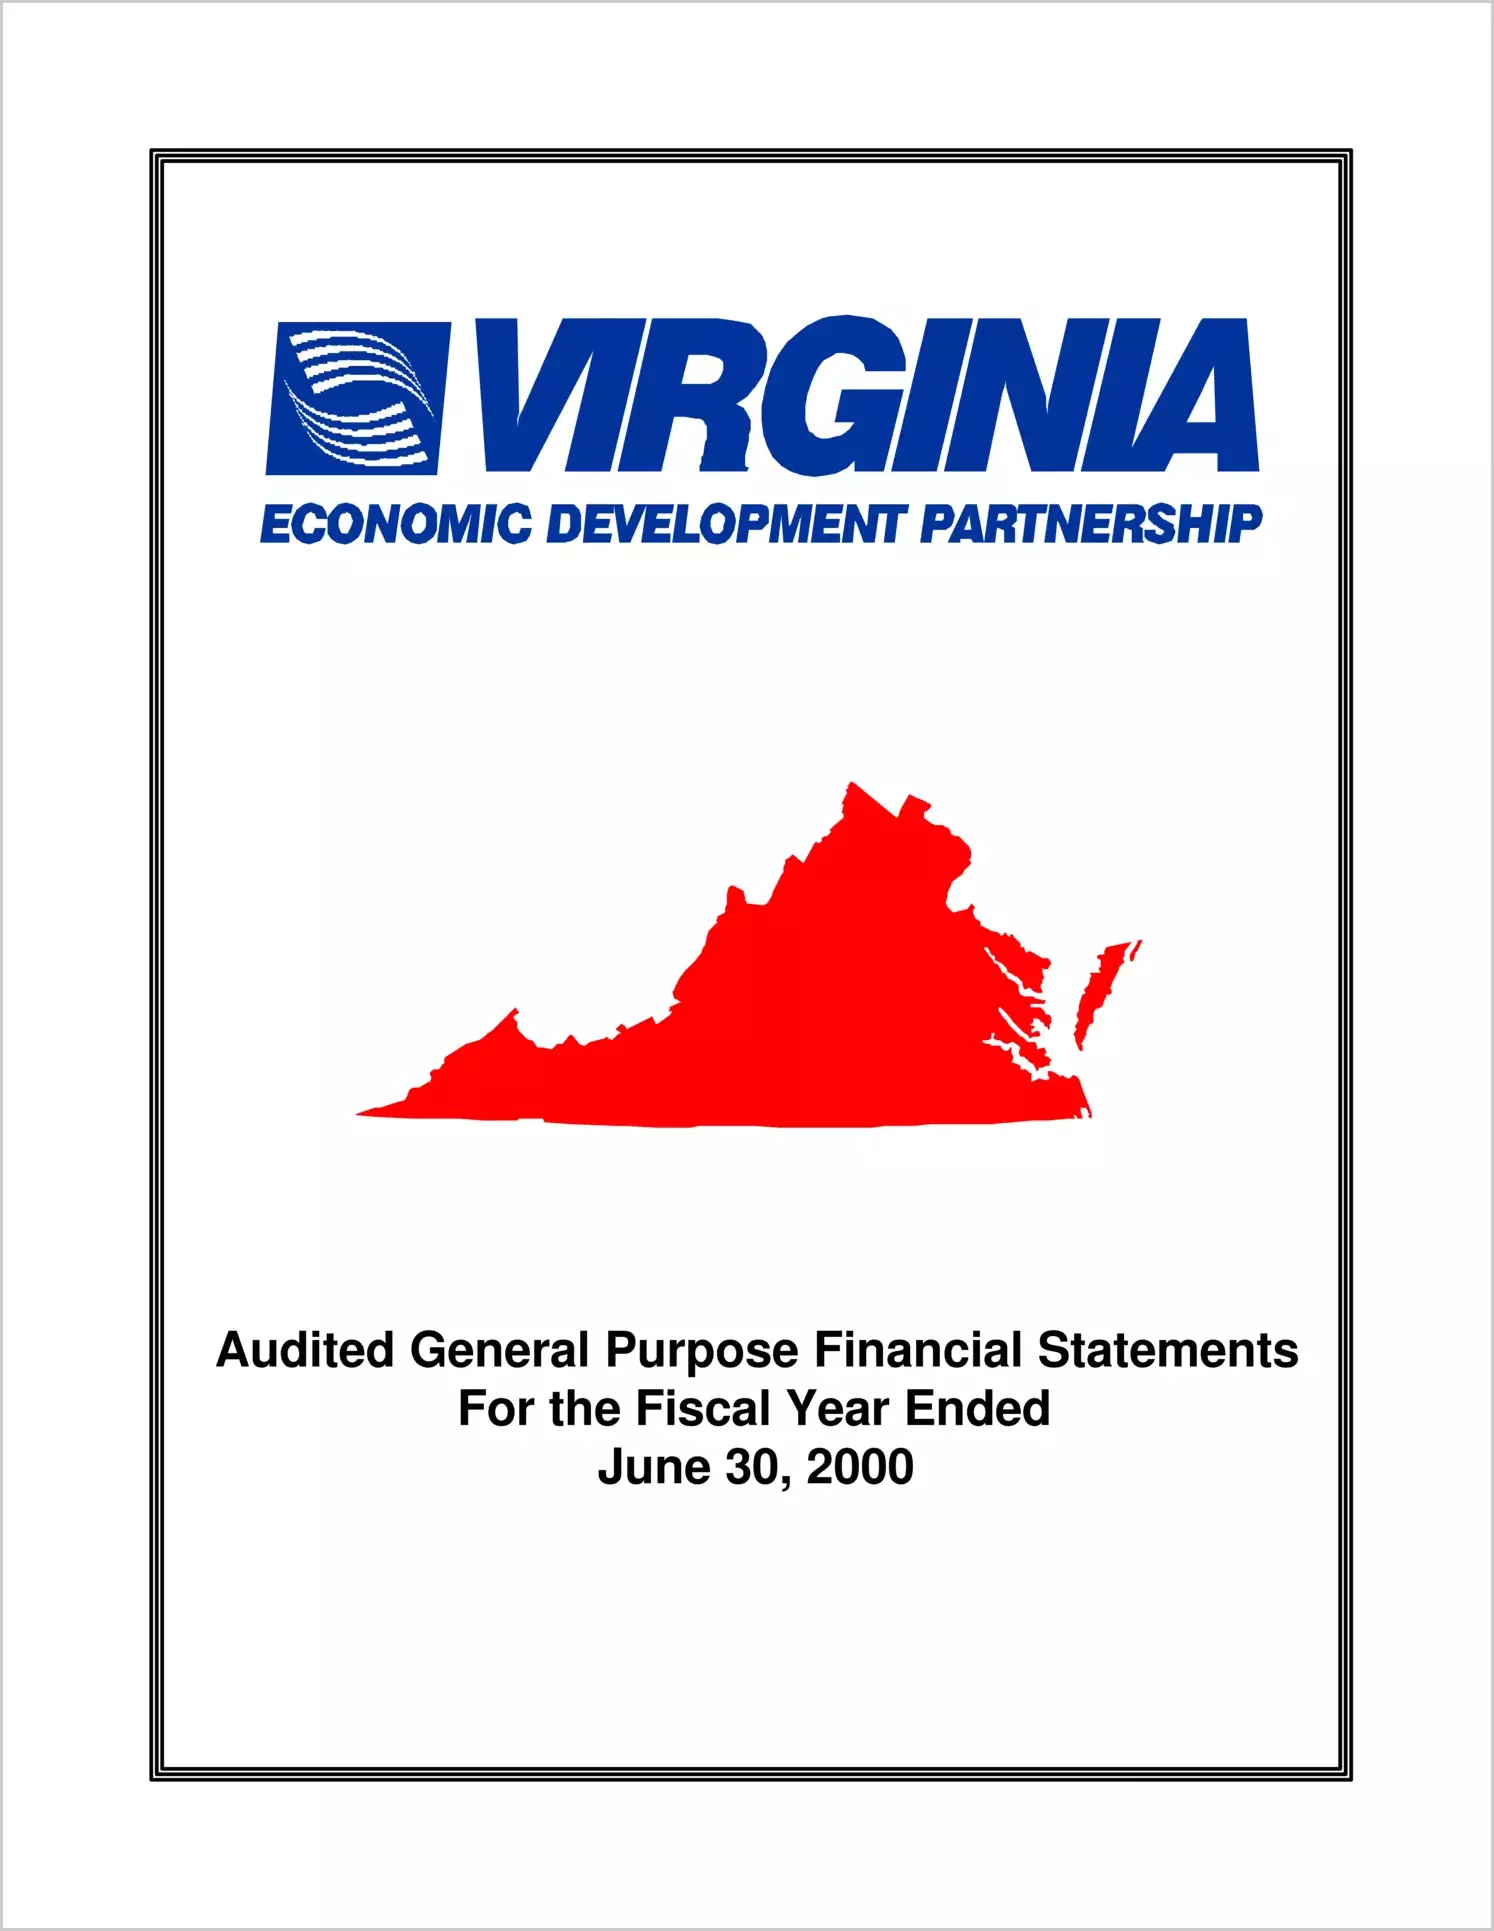 Virginia Economic Development Partnership Audited General Purpose Financial Statements for the year ended June 30, 2000